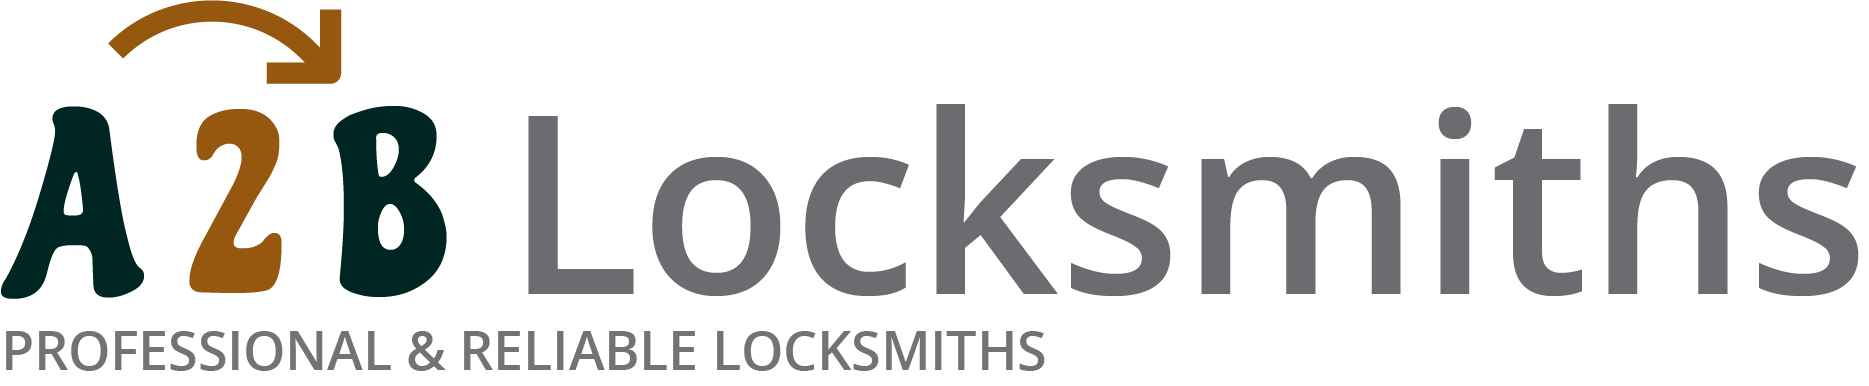 If you are locked out of house in Bexleyheath, our 24/7 local emergency locksmith services can help you.